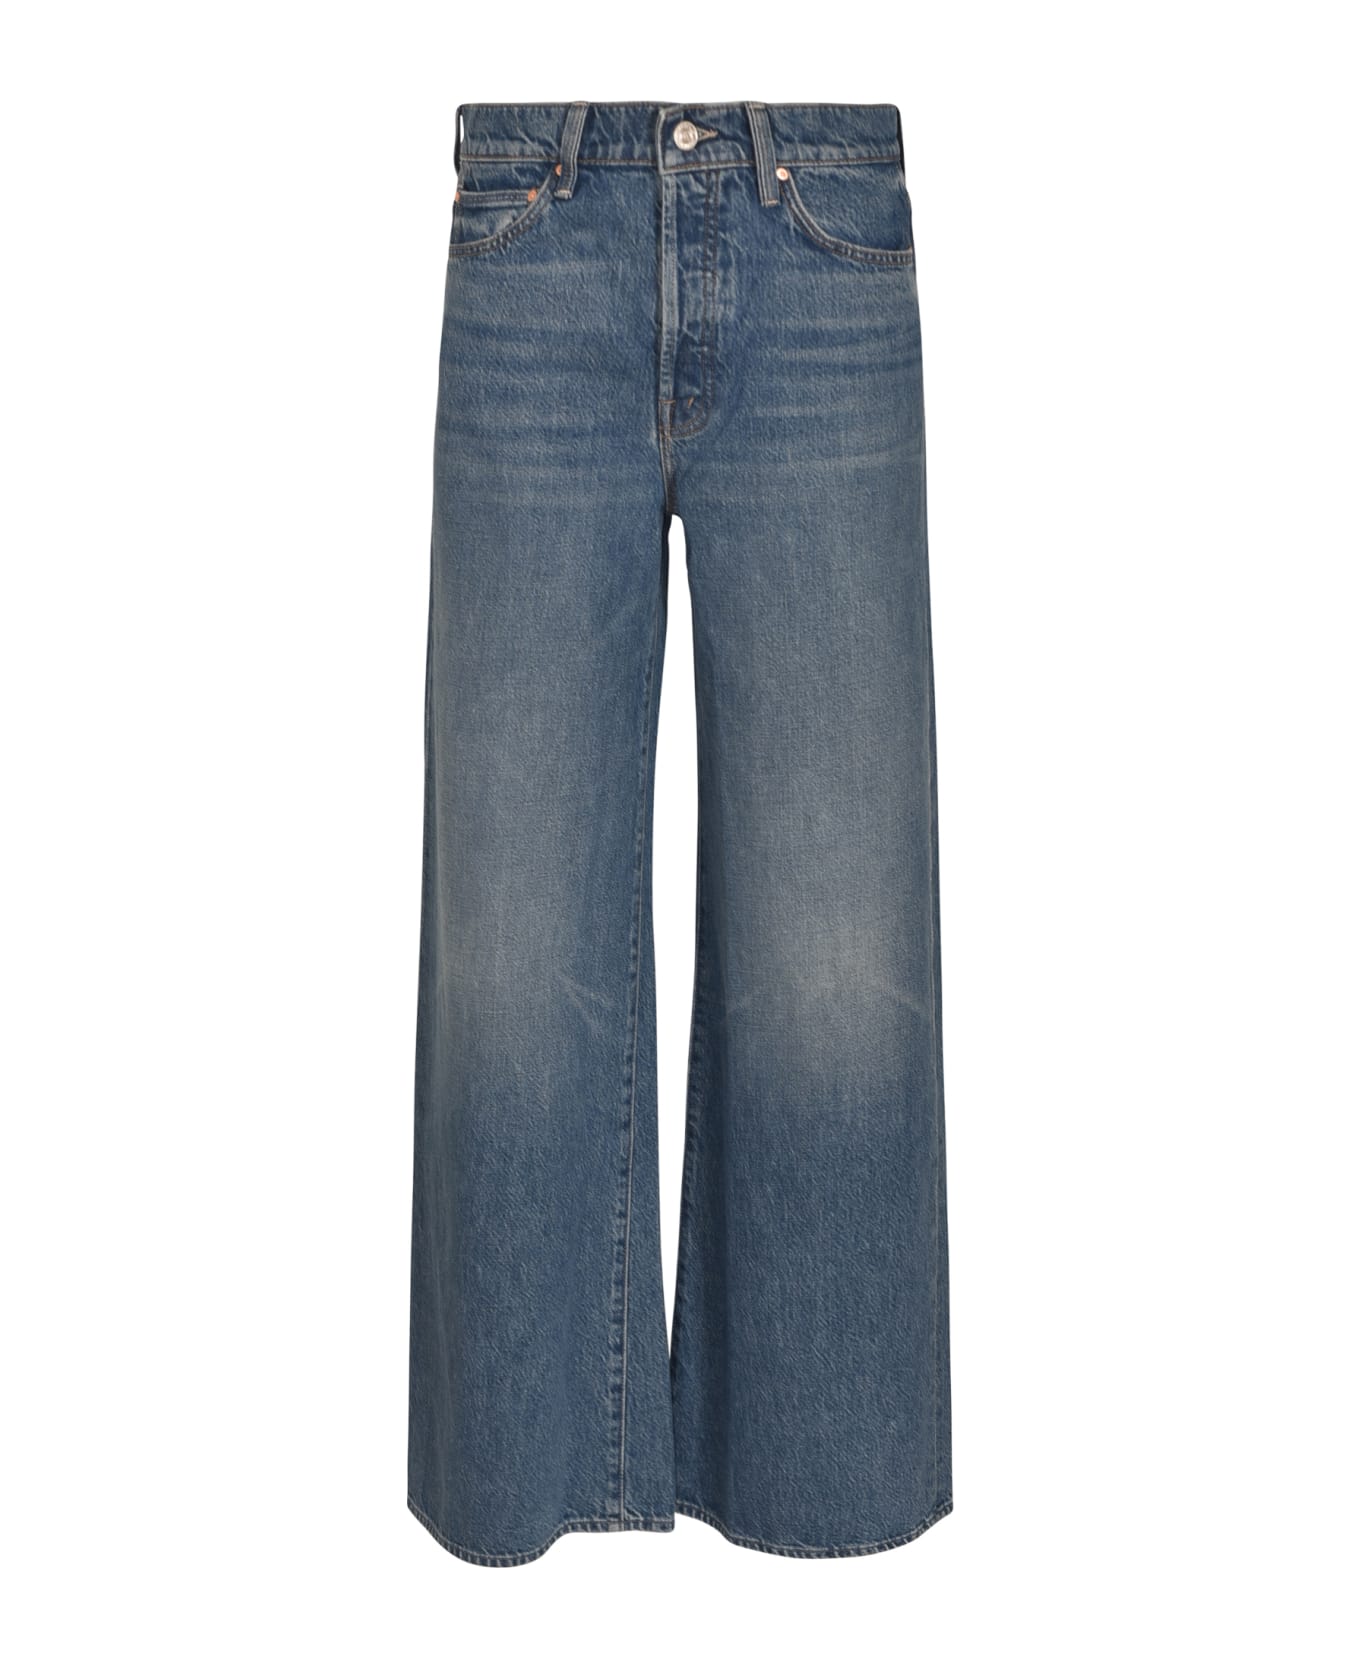 Mother The Ditcher Roller Rambler Jeans - Htr Hit The Ground